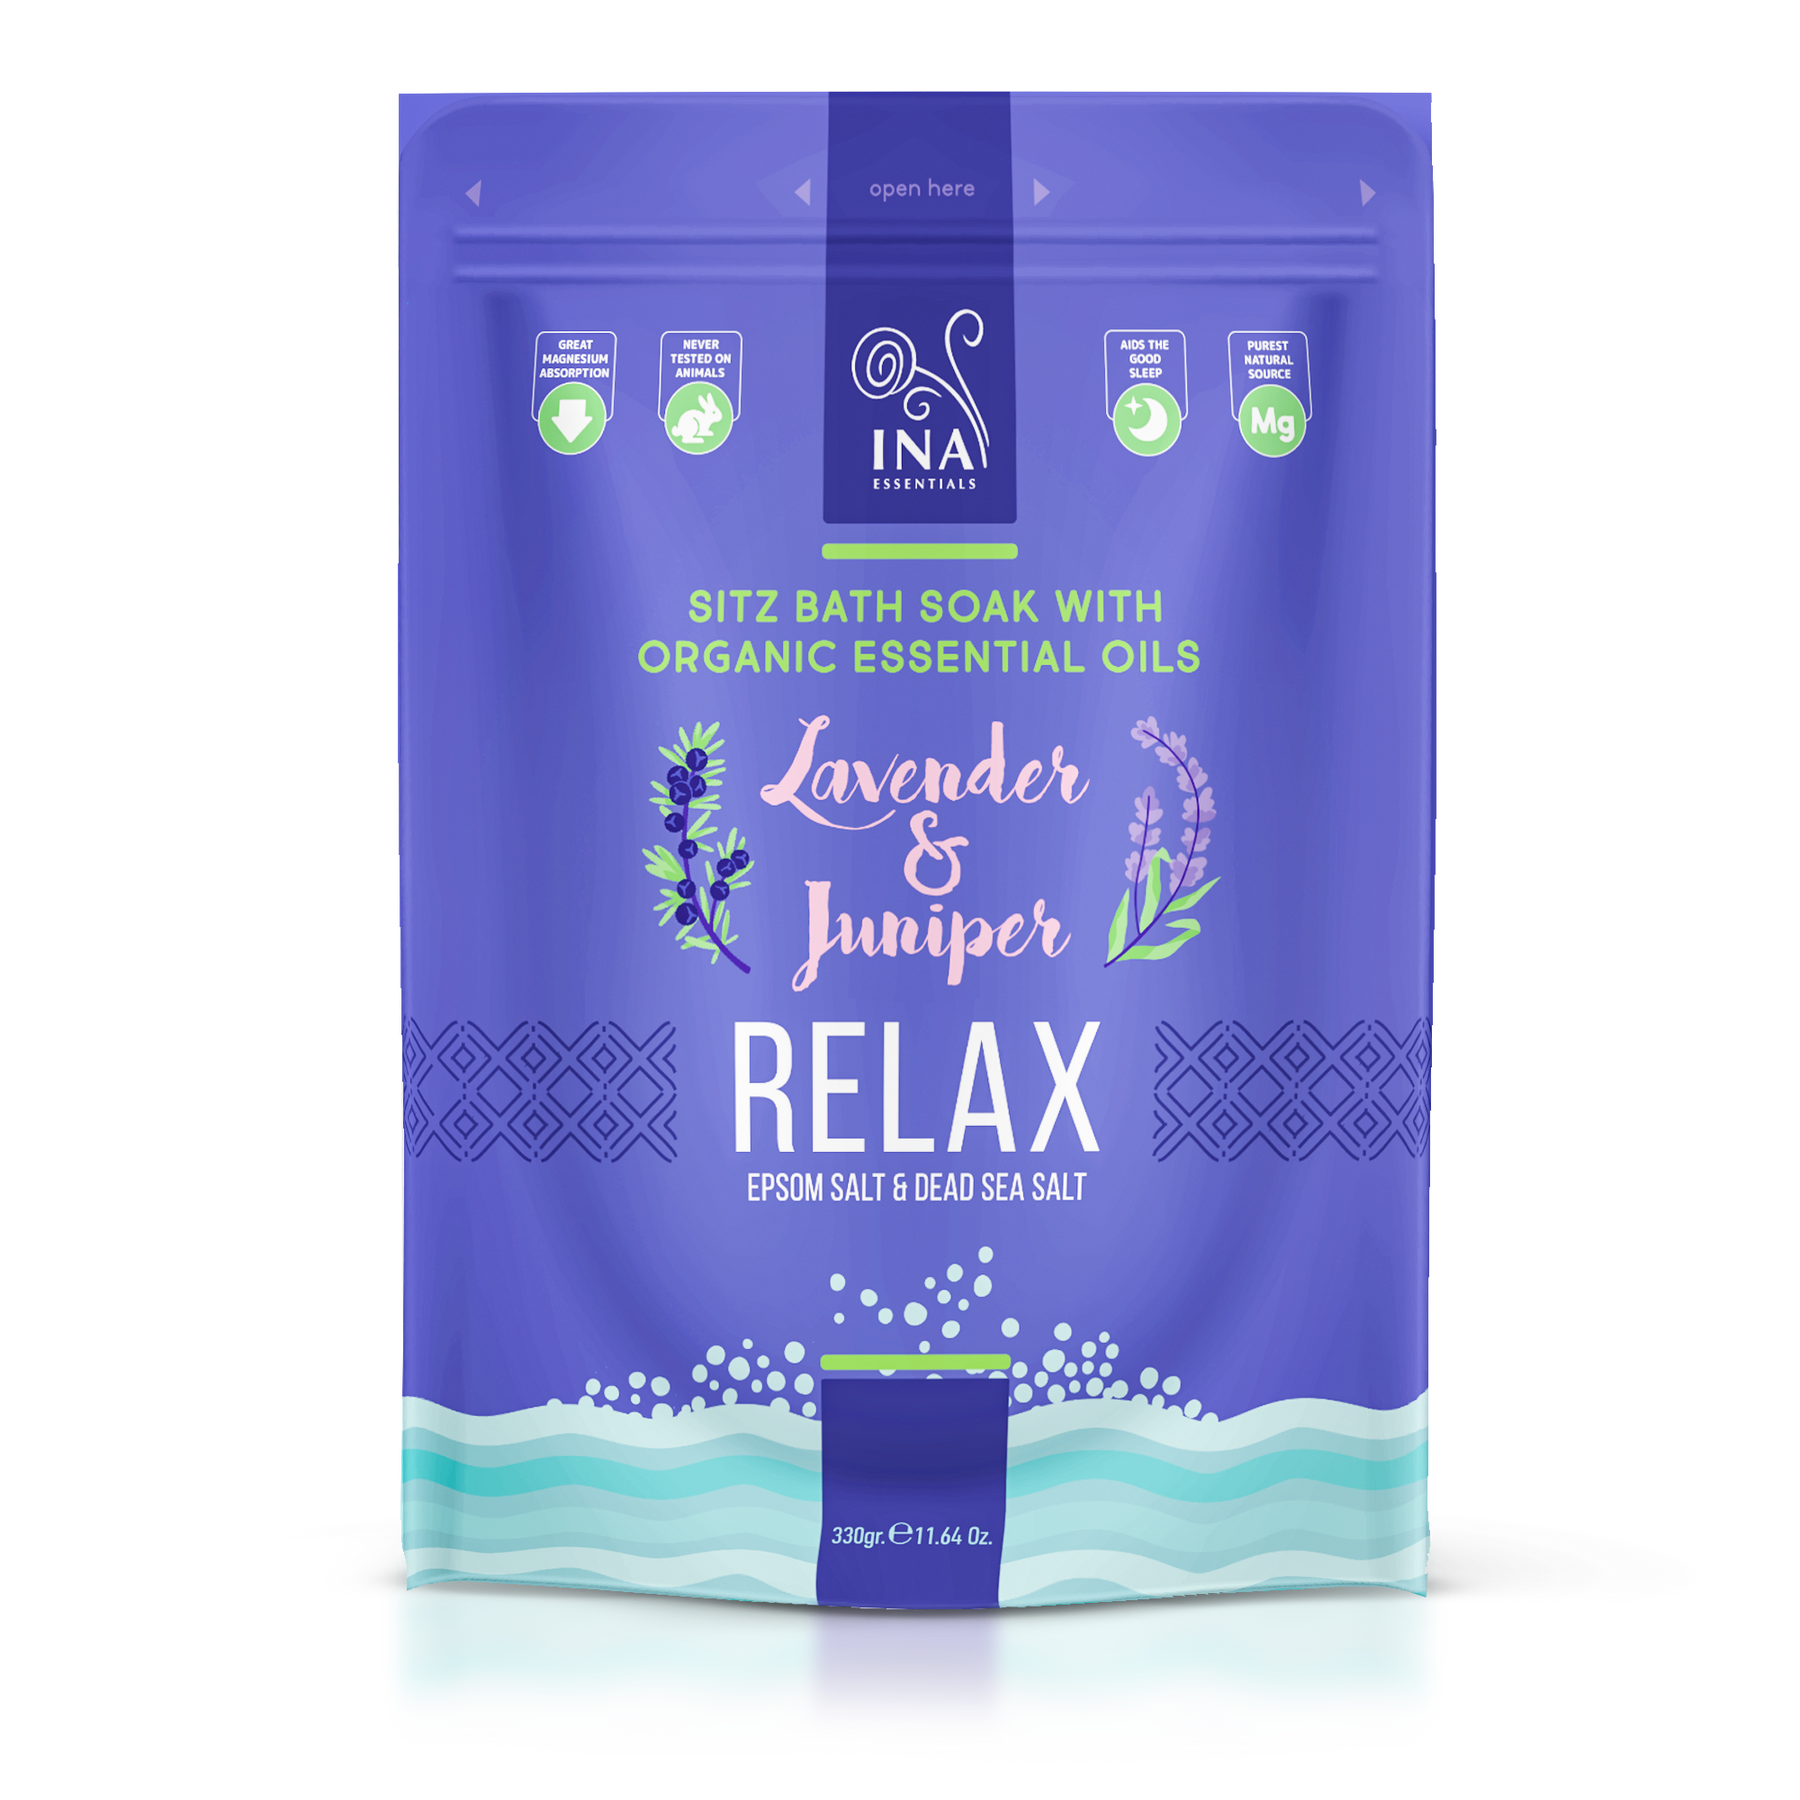 Relax–Sitz bath salts with Lavender and Juniper for relaxation and stress relief